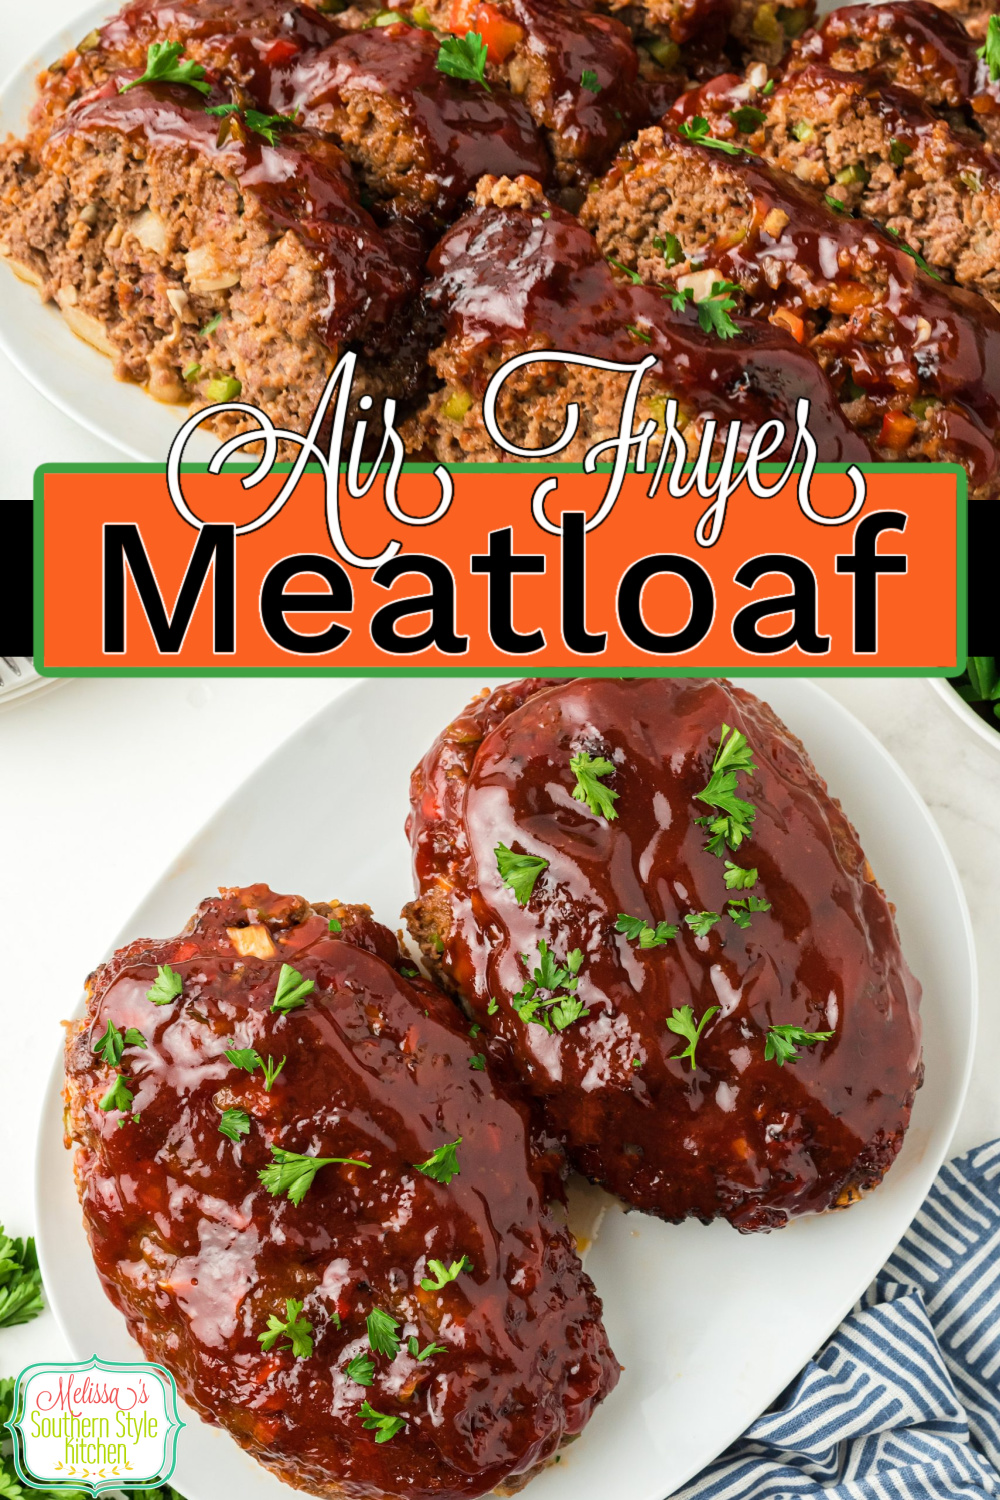 This juicy Southern style Air Fryer Meatloaf recipe is topped with a sweet and tangy tomato glaze. Bonus, oven instructions included! #airfryerrecipes #airfryermeatloaf #southernmeatloafrecipe #easymeatloafrecipe #easygroundbeefrecipes #meatloaf #bestairfryerrecipes via @melissasssk